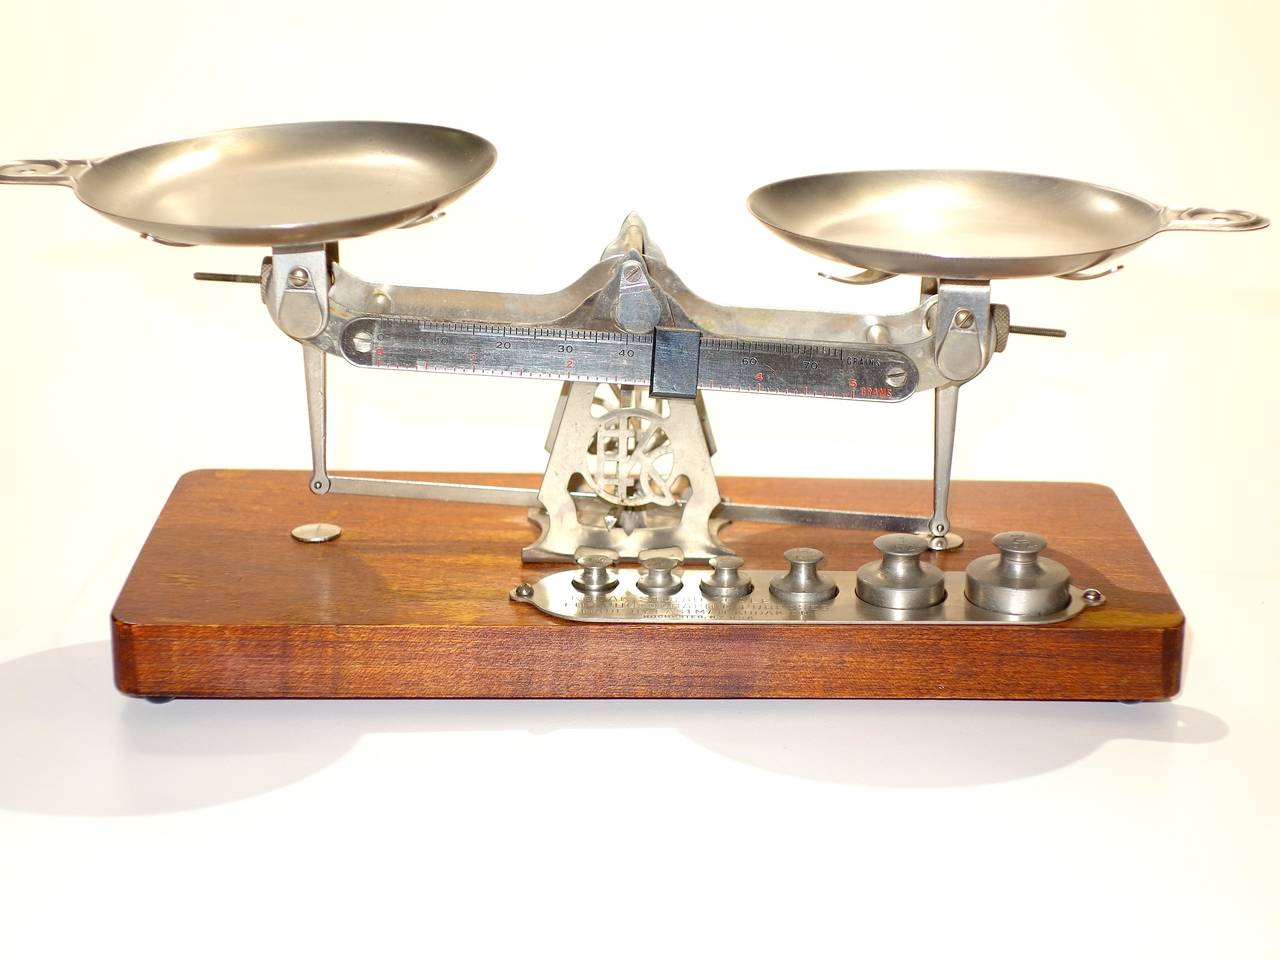 Submitted for your approval, is this rare Kodak factory issued film processing chemical balance measuring scale, circa 1940s and used to measure out the exact weights of film laboratory processing chemicals. Beam measures in both Grains and